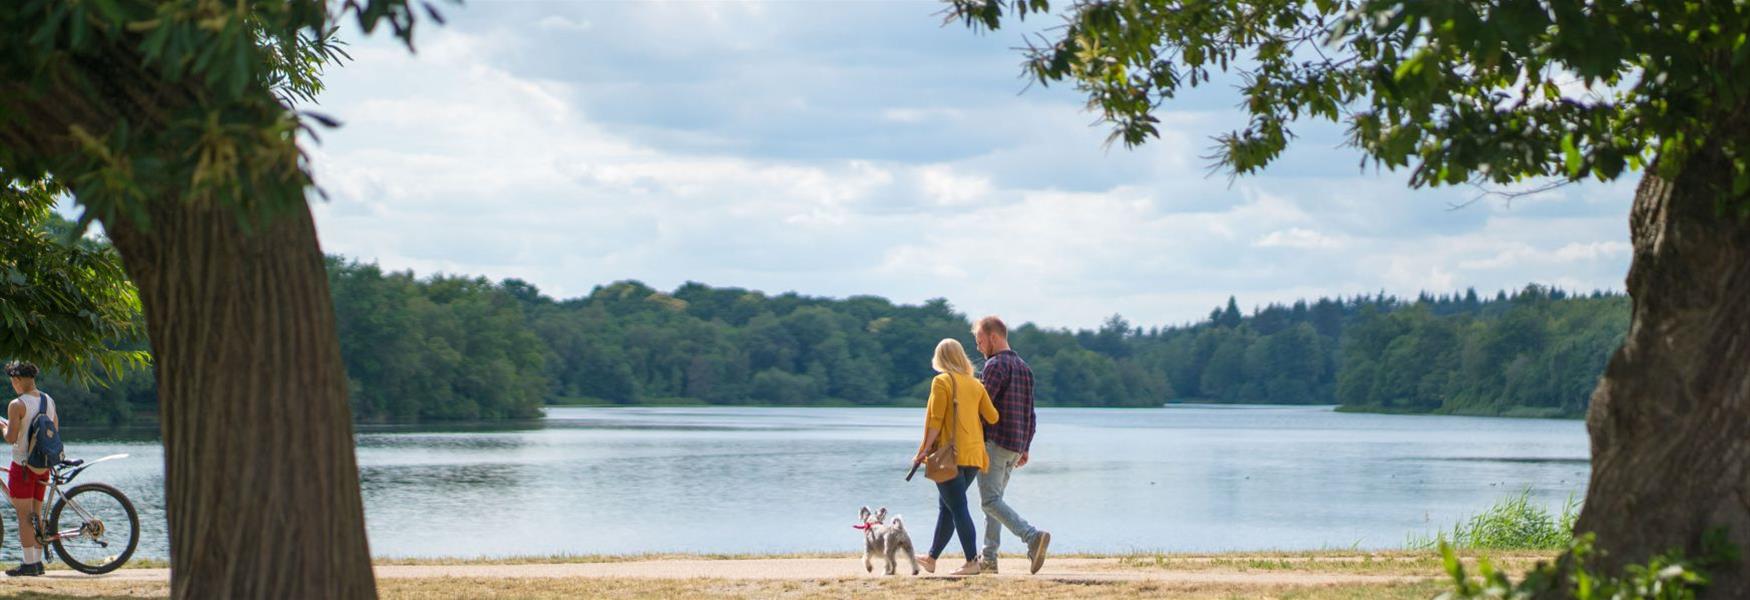 Two people walking their dog at Virginia Water, Windsor Great Park